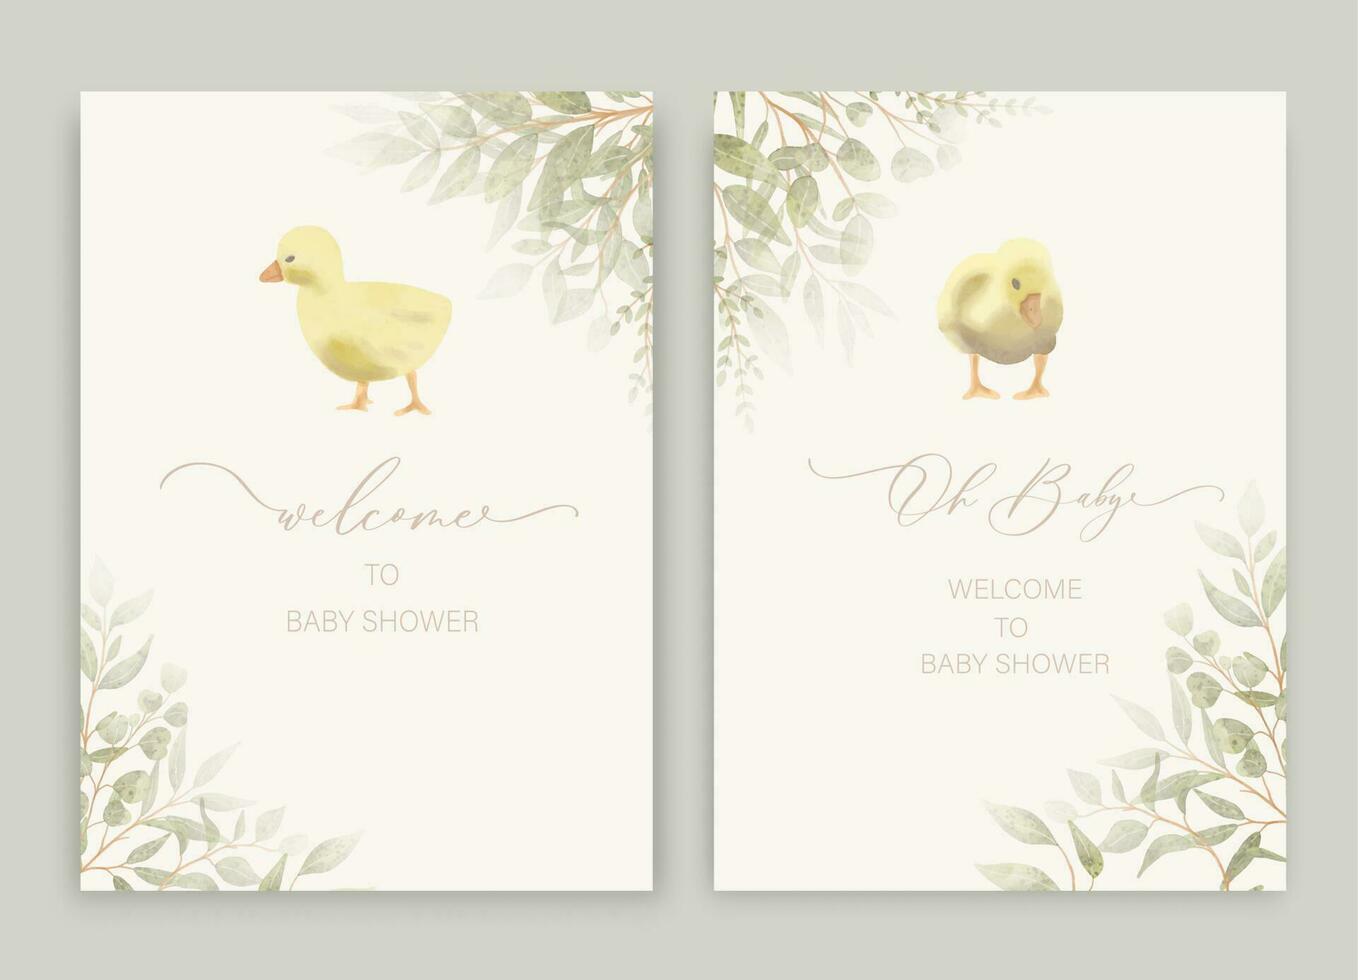 Cute baby shower watercolor invitation card for baby and kids new born celebration. Little ducklings with green leaves. vector